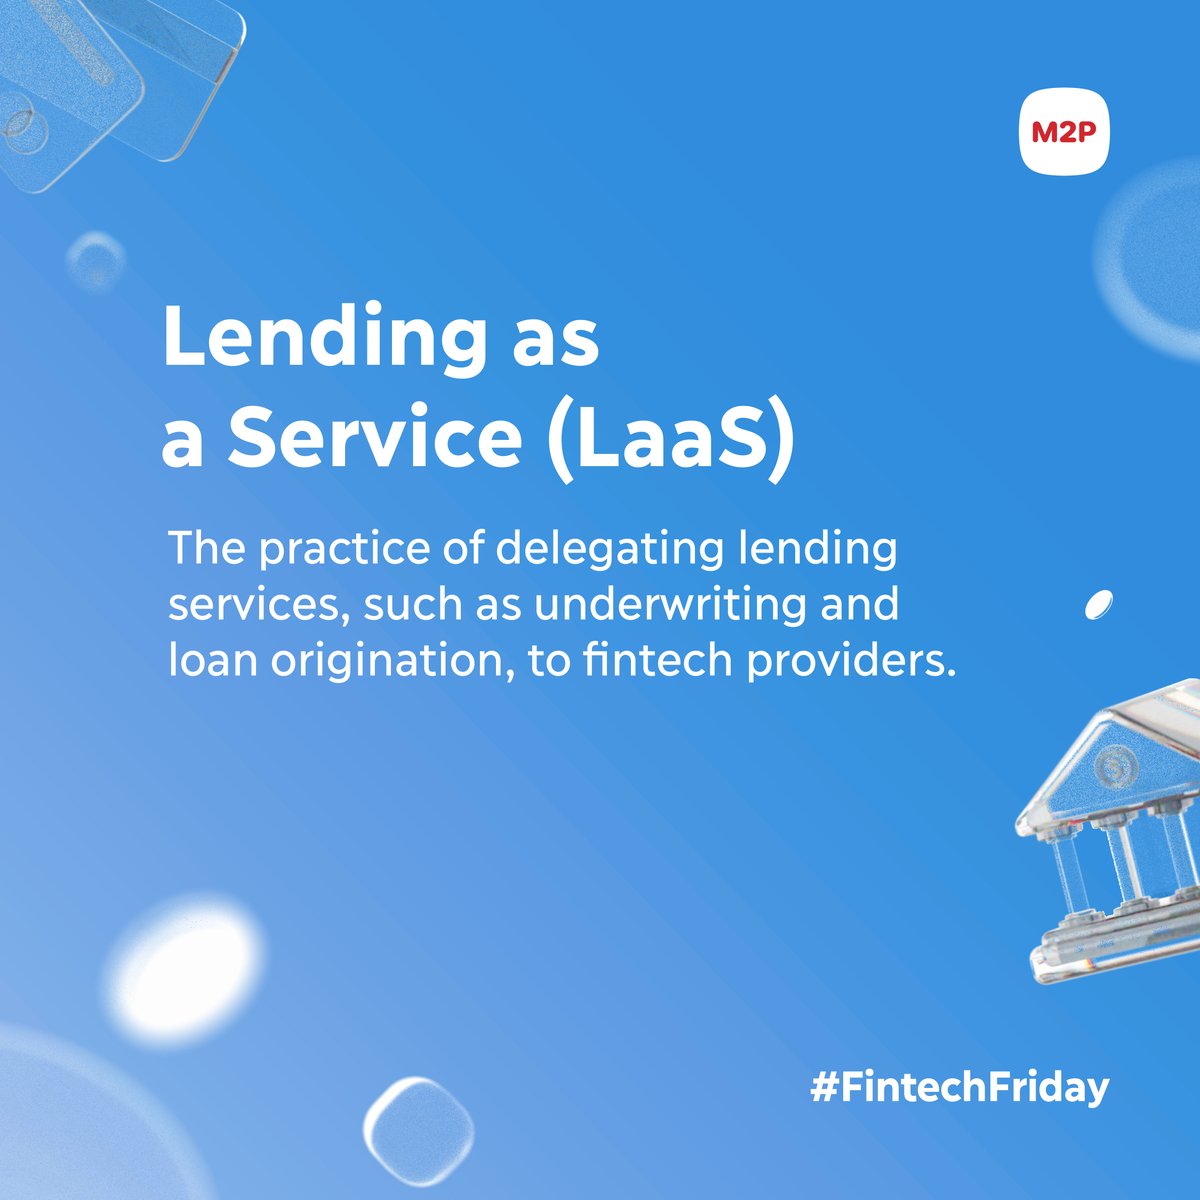 🤝Lending as a Service offers cost savings, scalability, speed, and expert risk management. Follow us to keep exploring more #Fintech terms.  

#FintechFriday #Innovation #Lending #Underwriting #LoanOrigination #Fintech #M2P